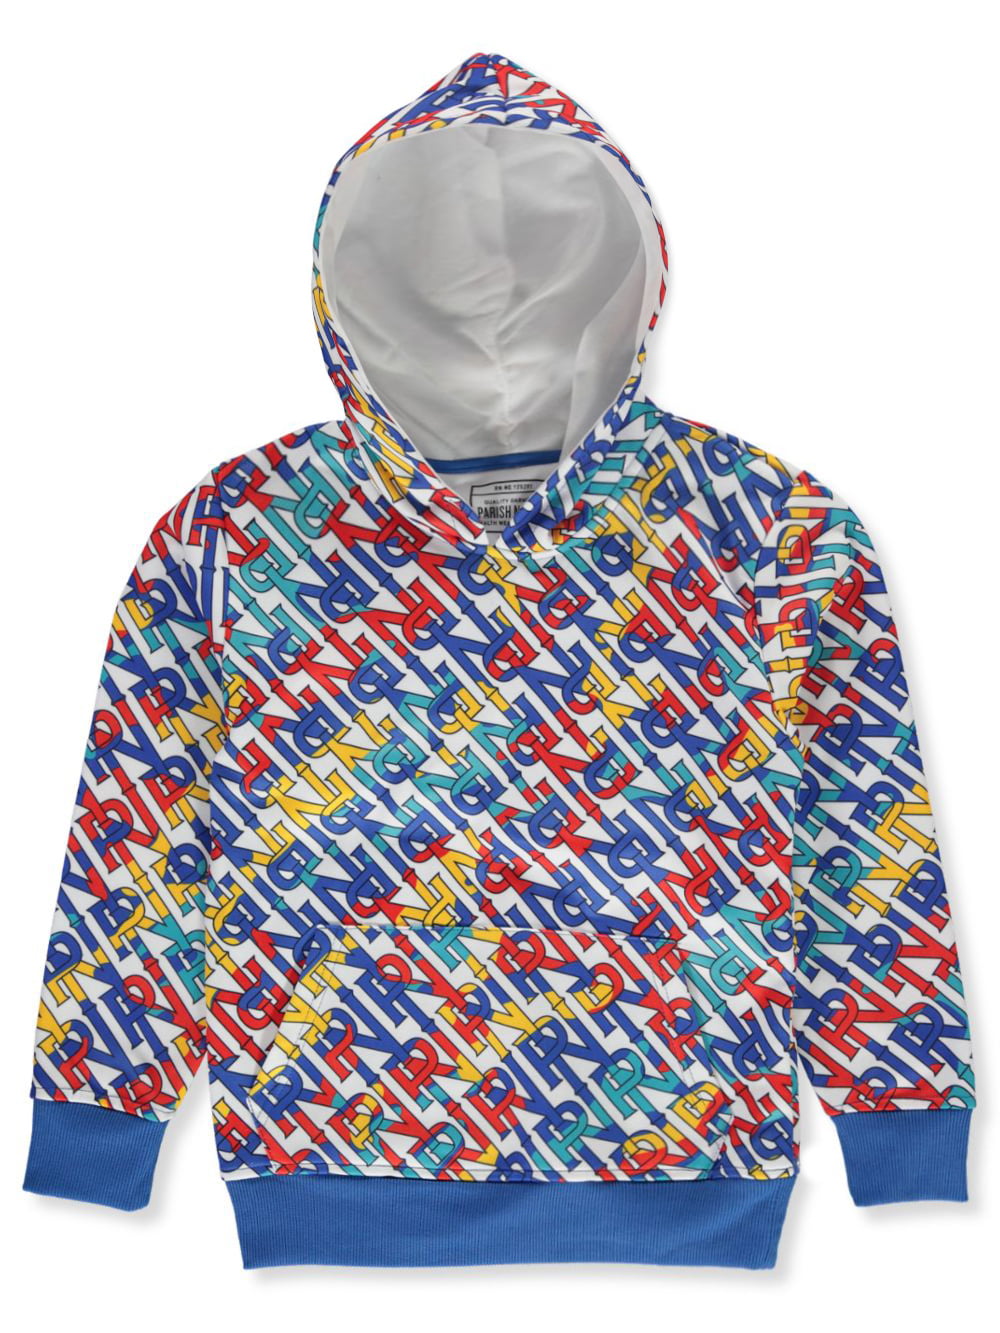 Kid Nation Kids Allover Printed Graphic Camo Pullover Sweatshirt for Boys Or Girls